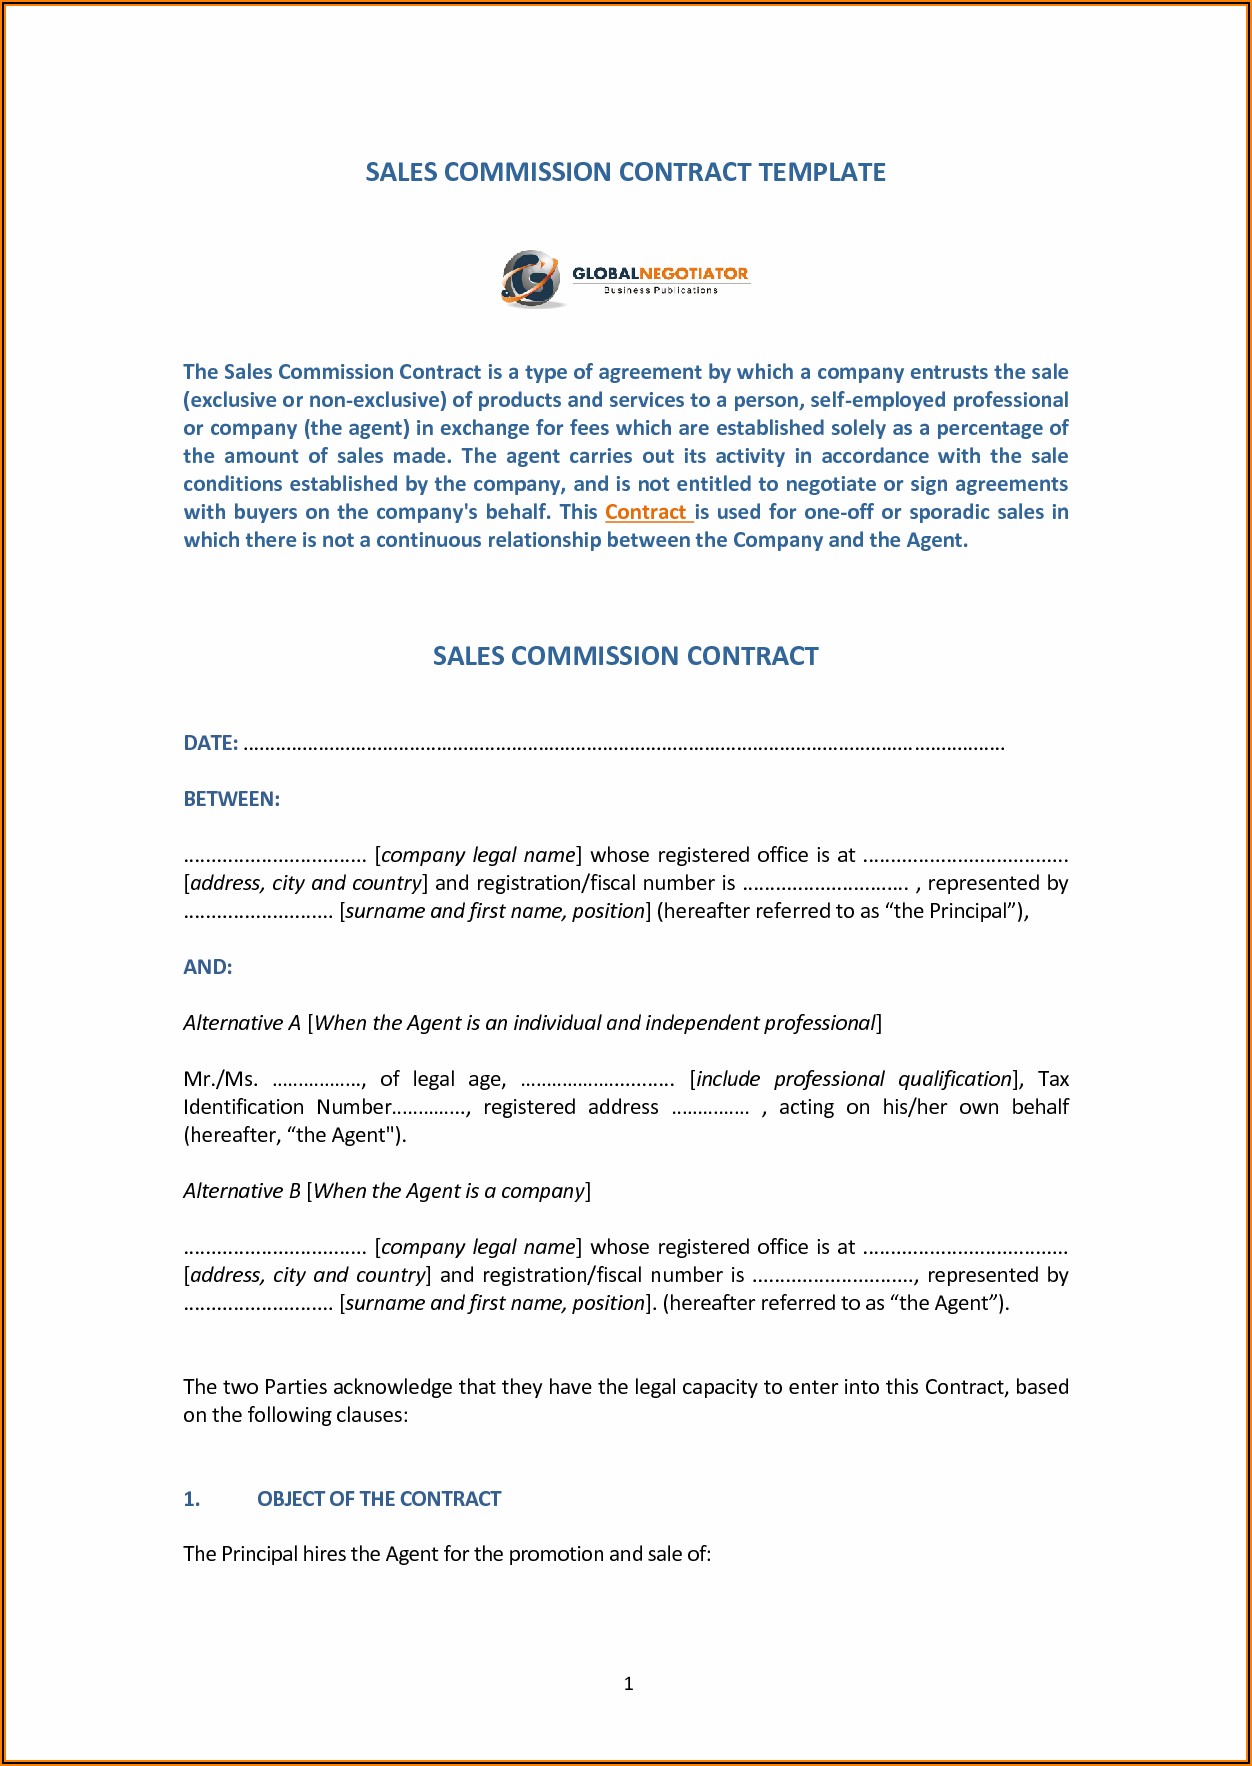 Fiscal Agent Agreement Template